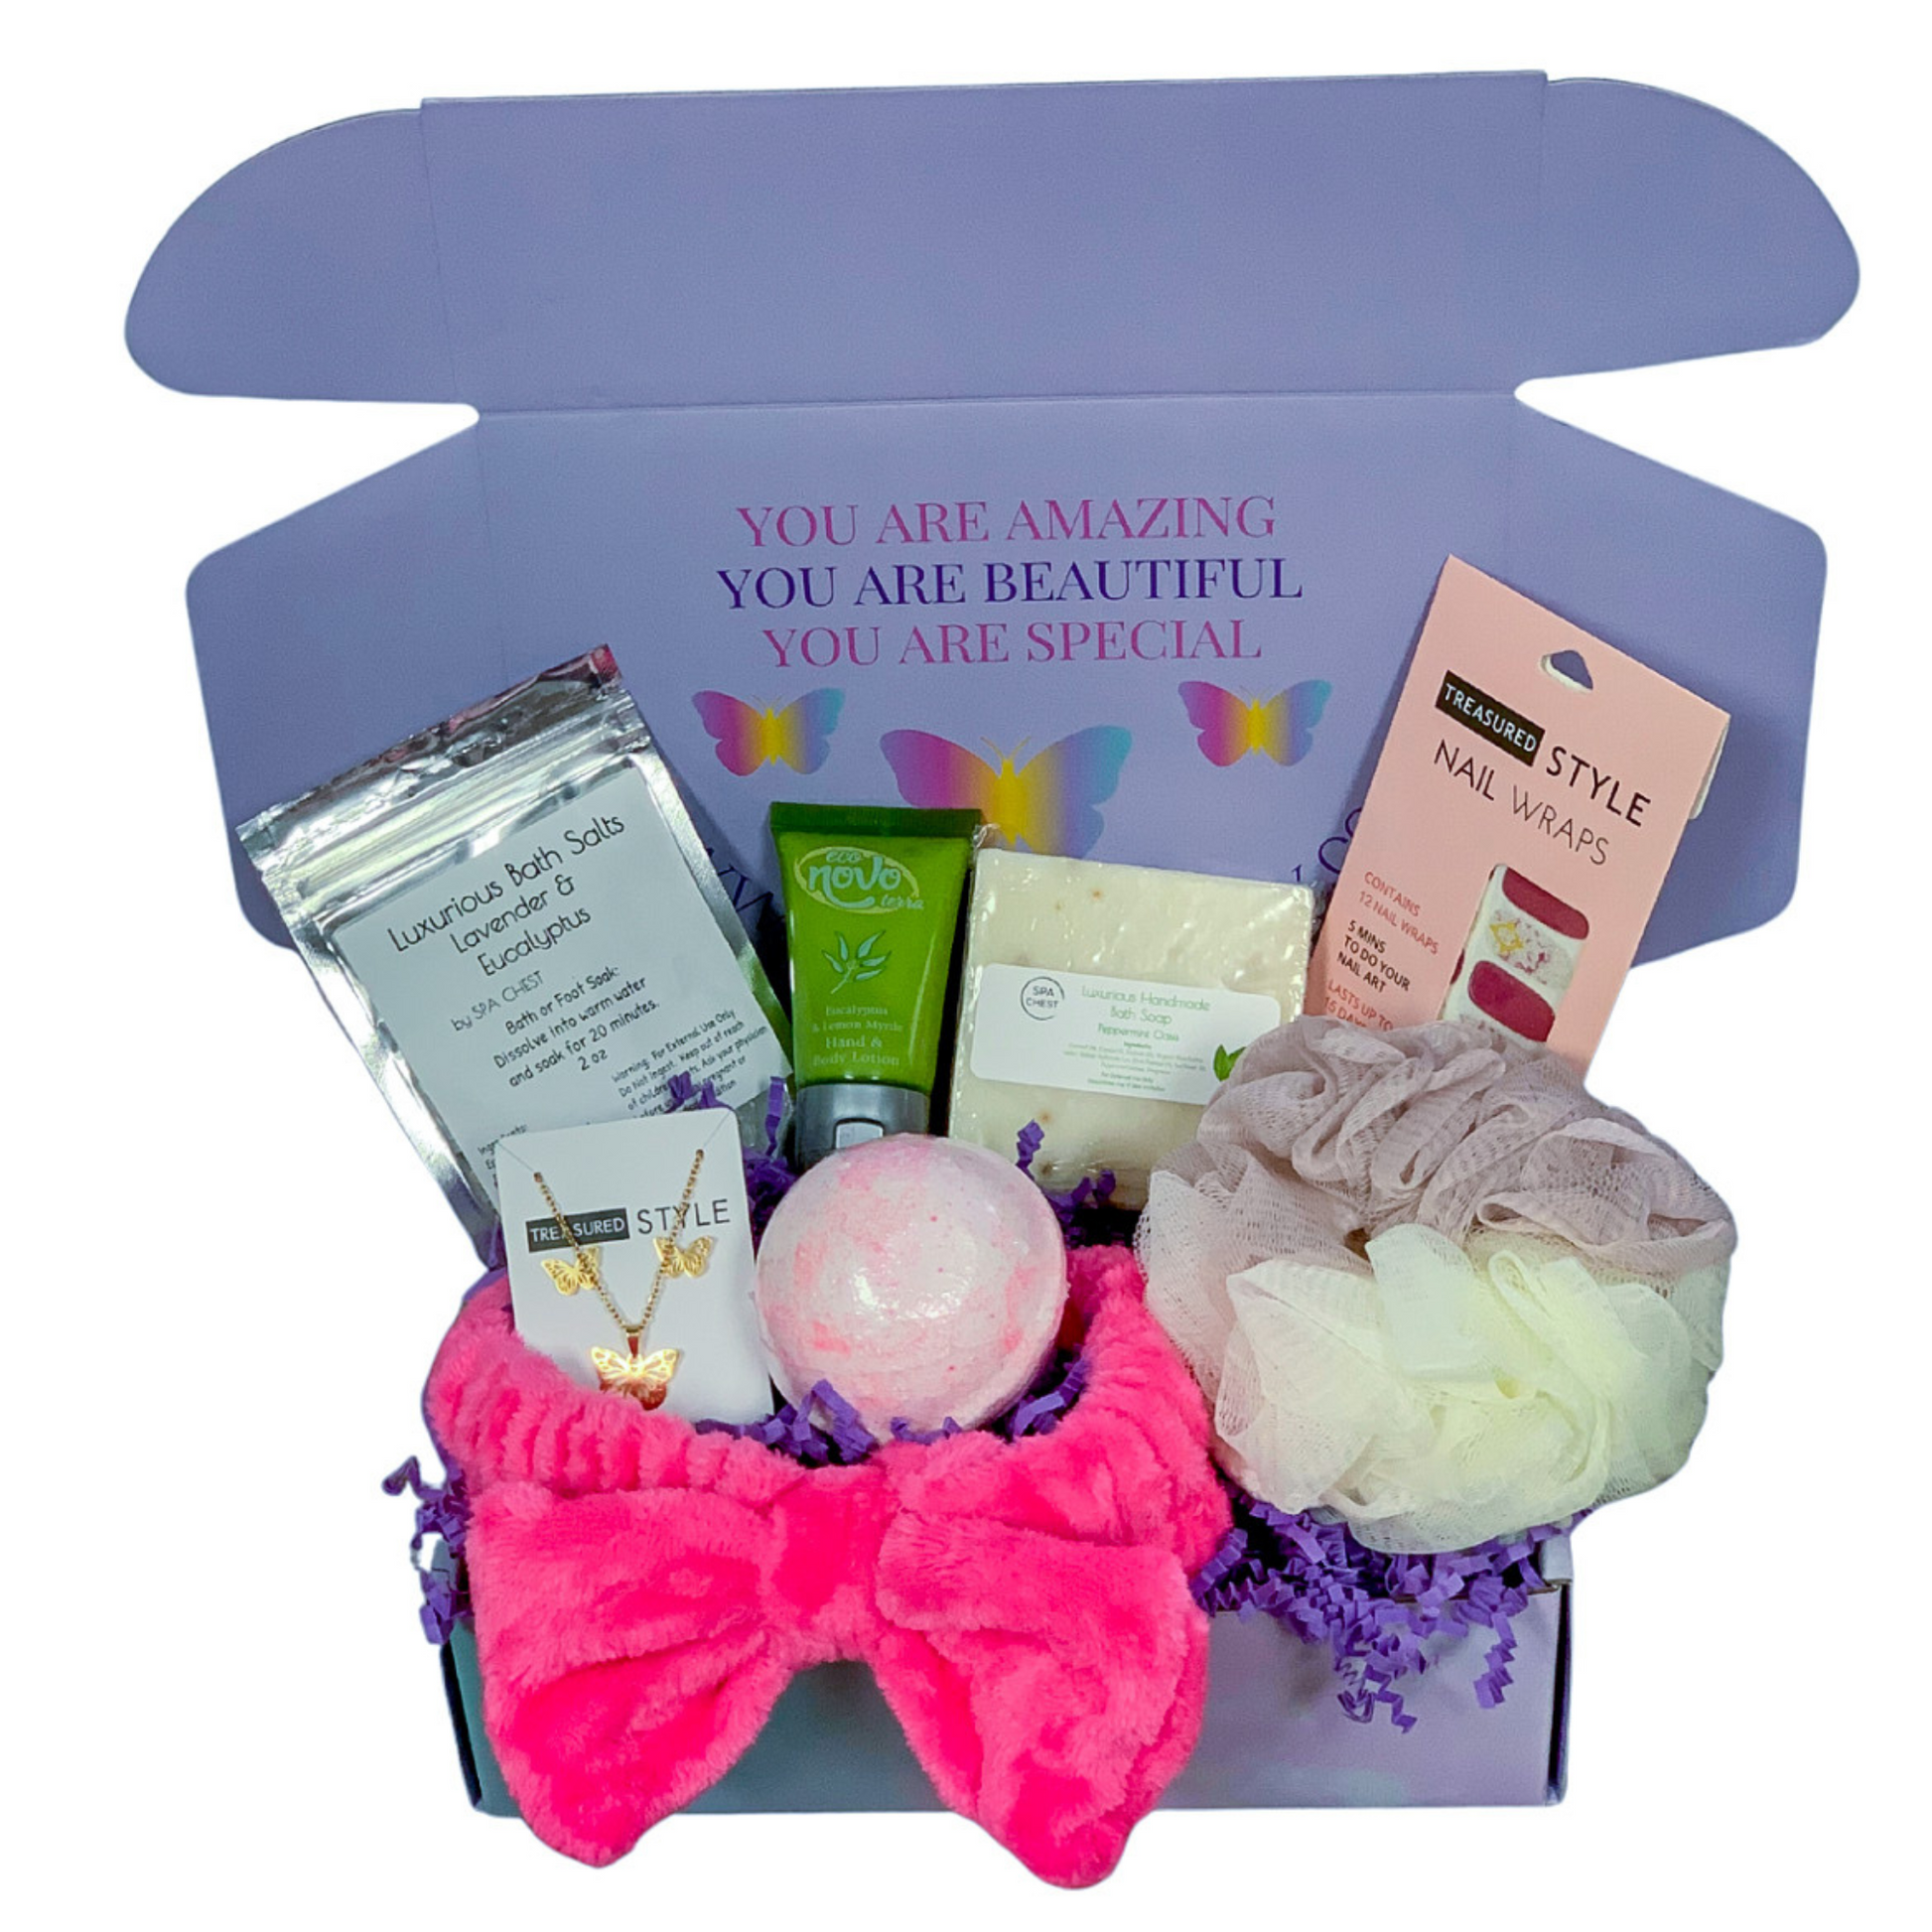 Handmade spa gift box for teen tween Christmas birthday care package just because for daughter stepdaughter niece graduation gift box get well soon gift Houston Texas Gift Shop Baytown 